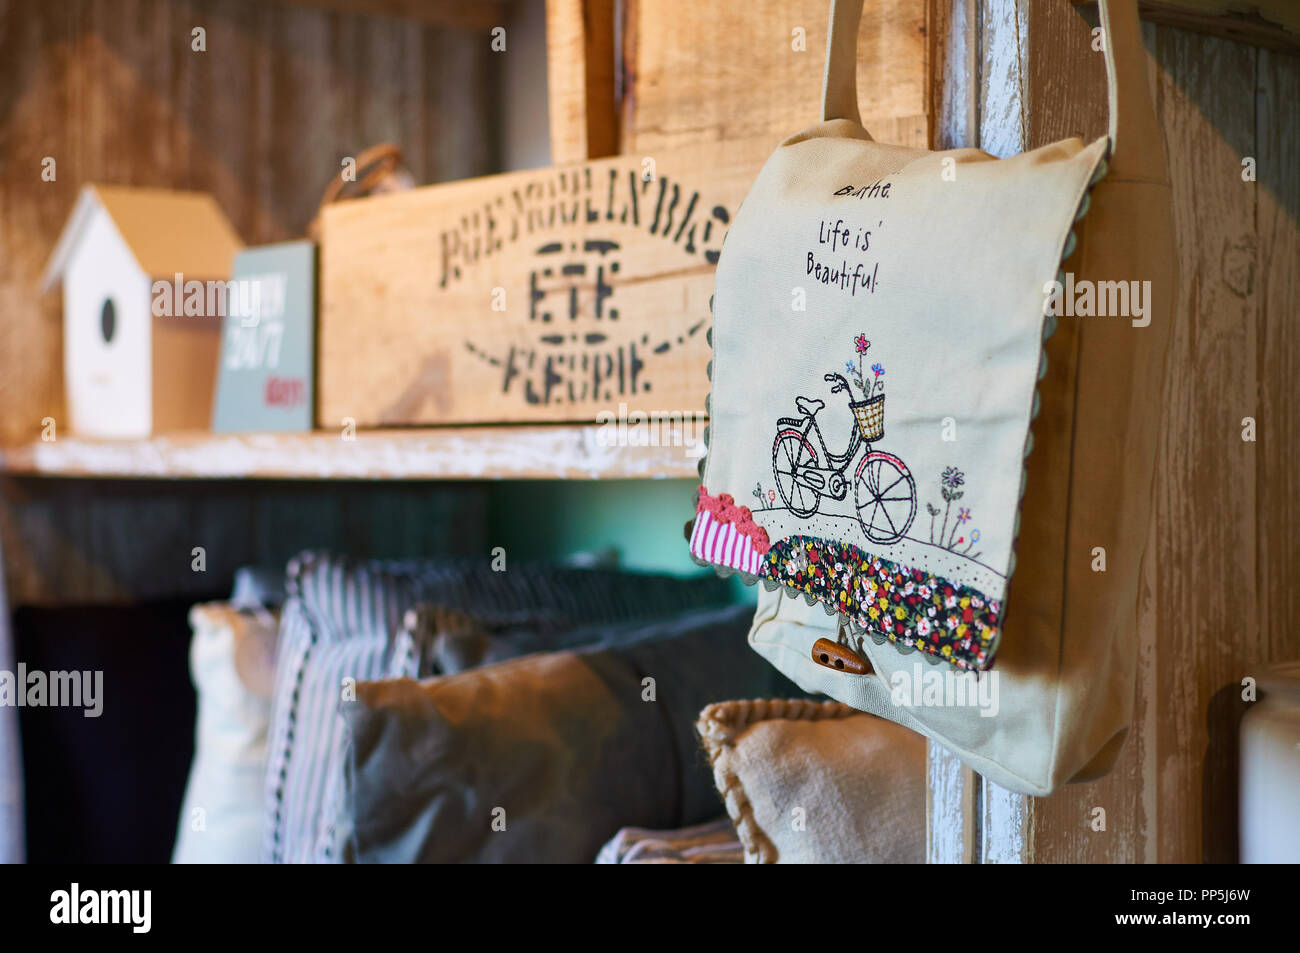 Handbag purse with Life is beautiful message and other stuff in Can Xicu vintage shop in El Pilar de La Mola(Formentera, Balearic Islands, Spain) Stock Photo